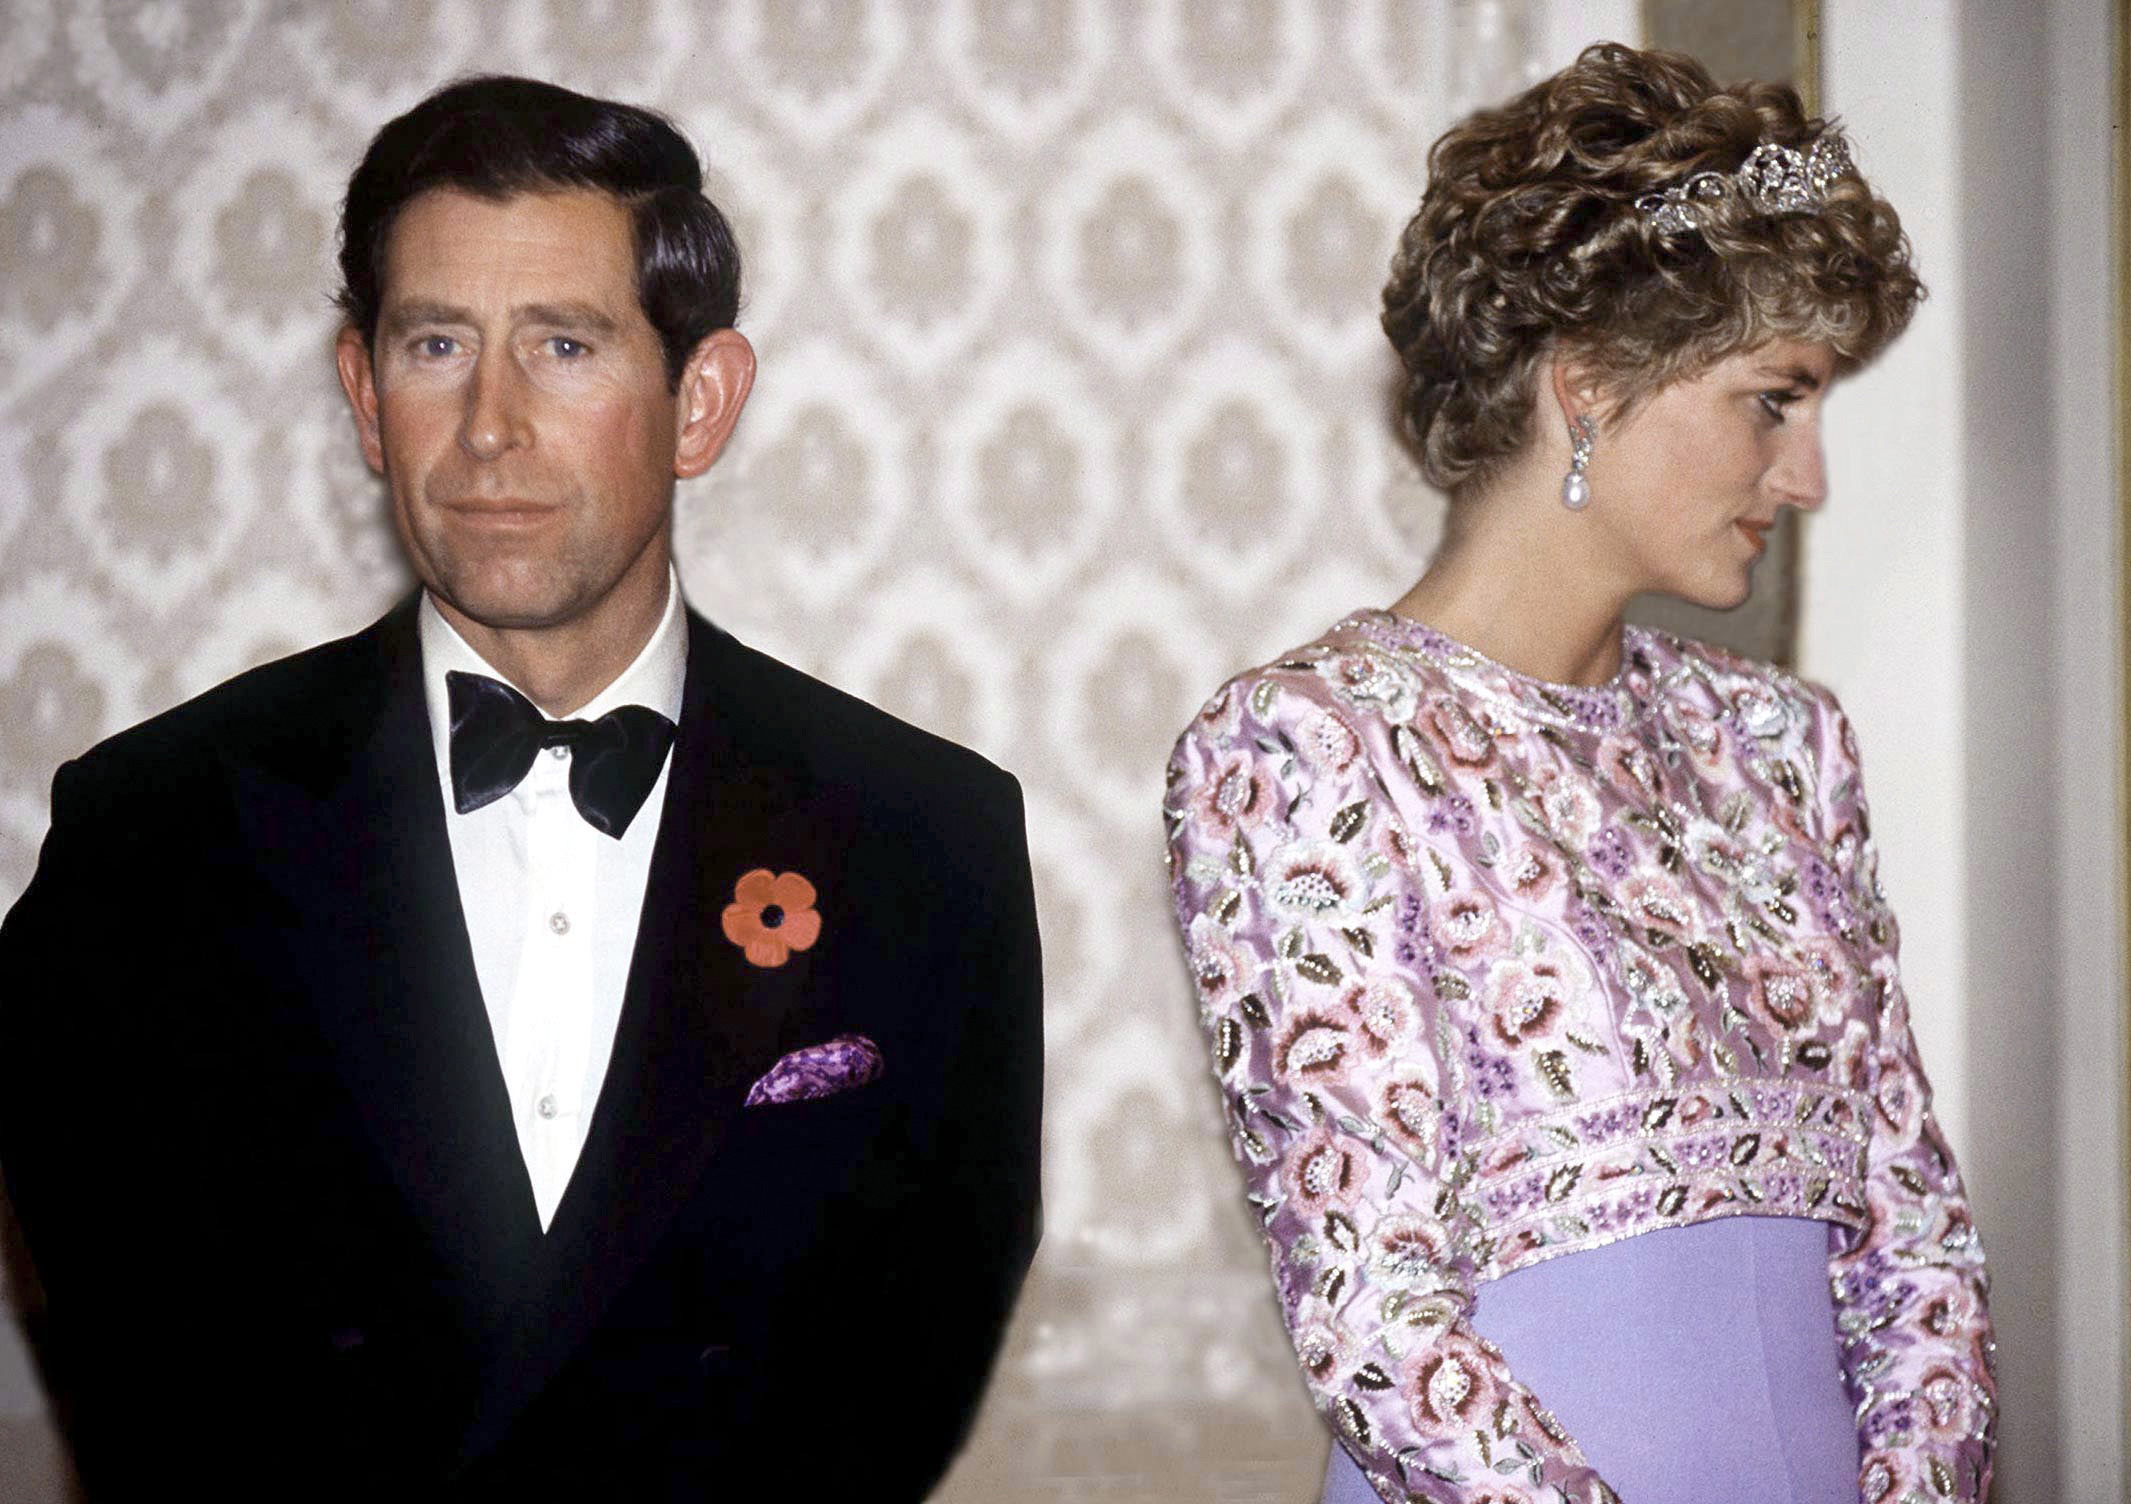 Prince Charles and Princess Diana on their last official trip together - a visit to The Republic of Korea (South Korea) on November 3, 1992 | Source: Getty Images